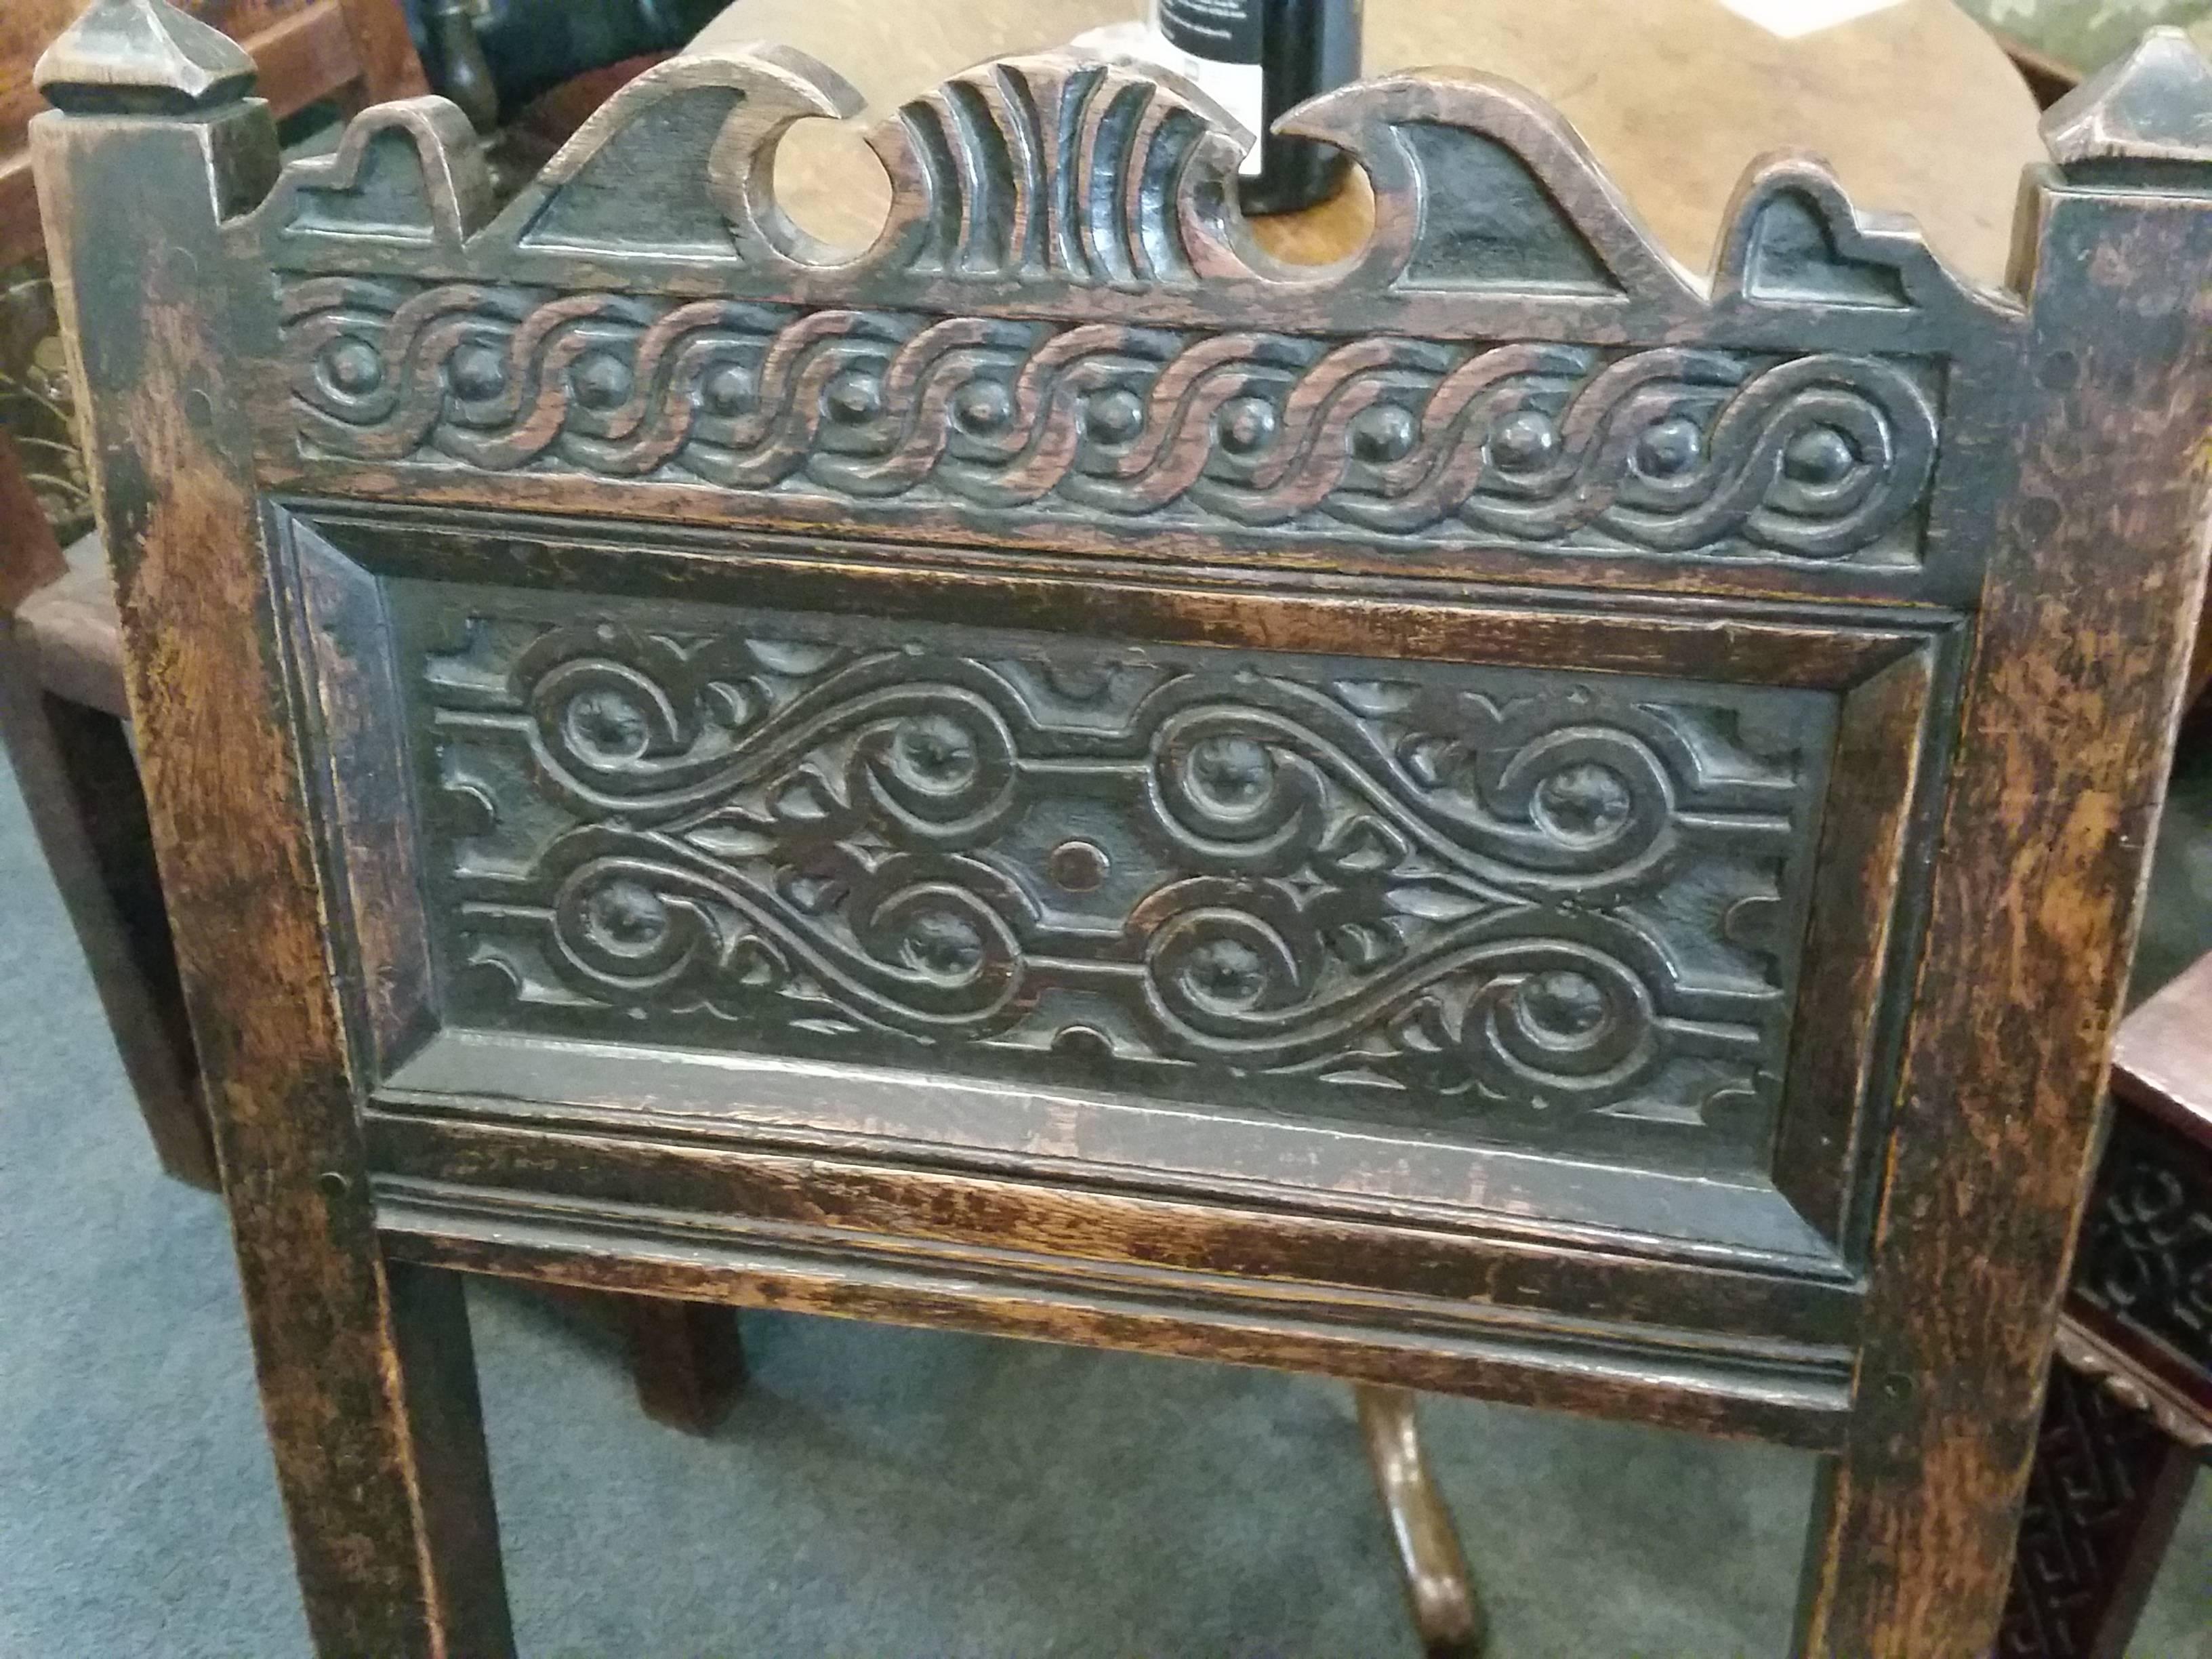 Great Britain (UK) 17th Century Oak Wainscot Chair For Sale